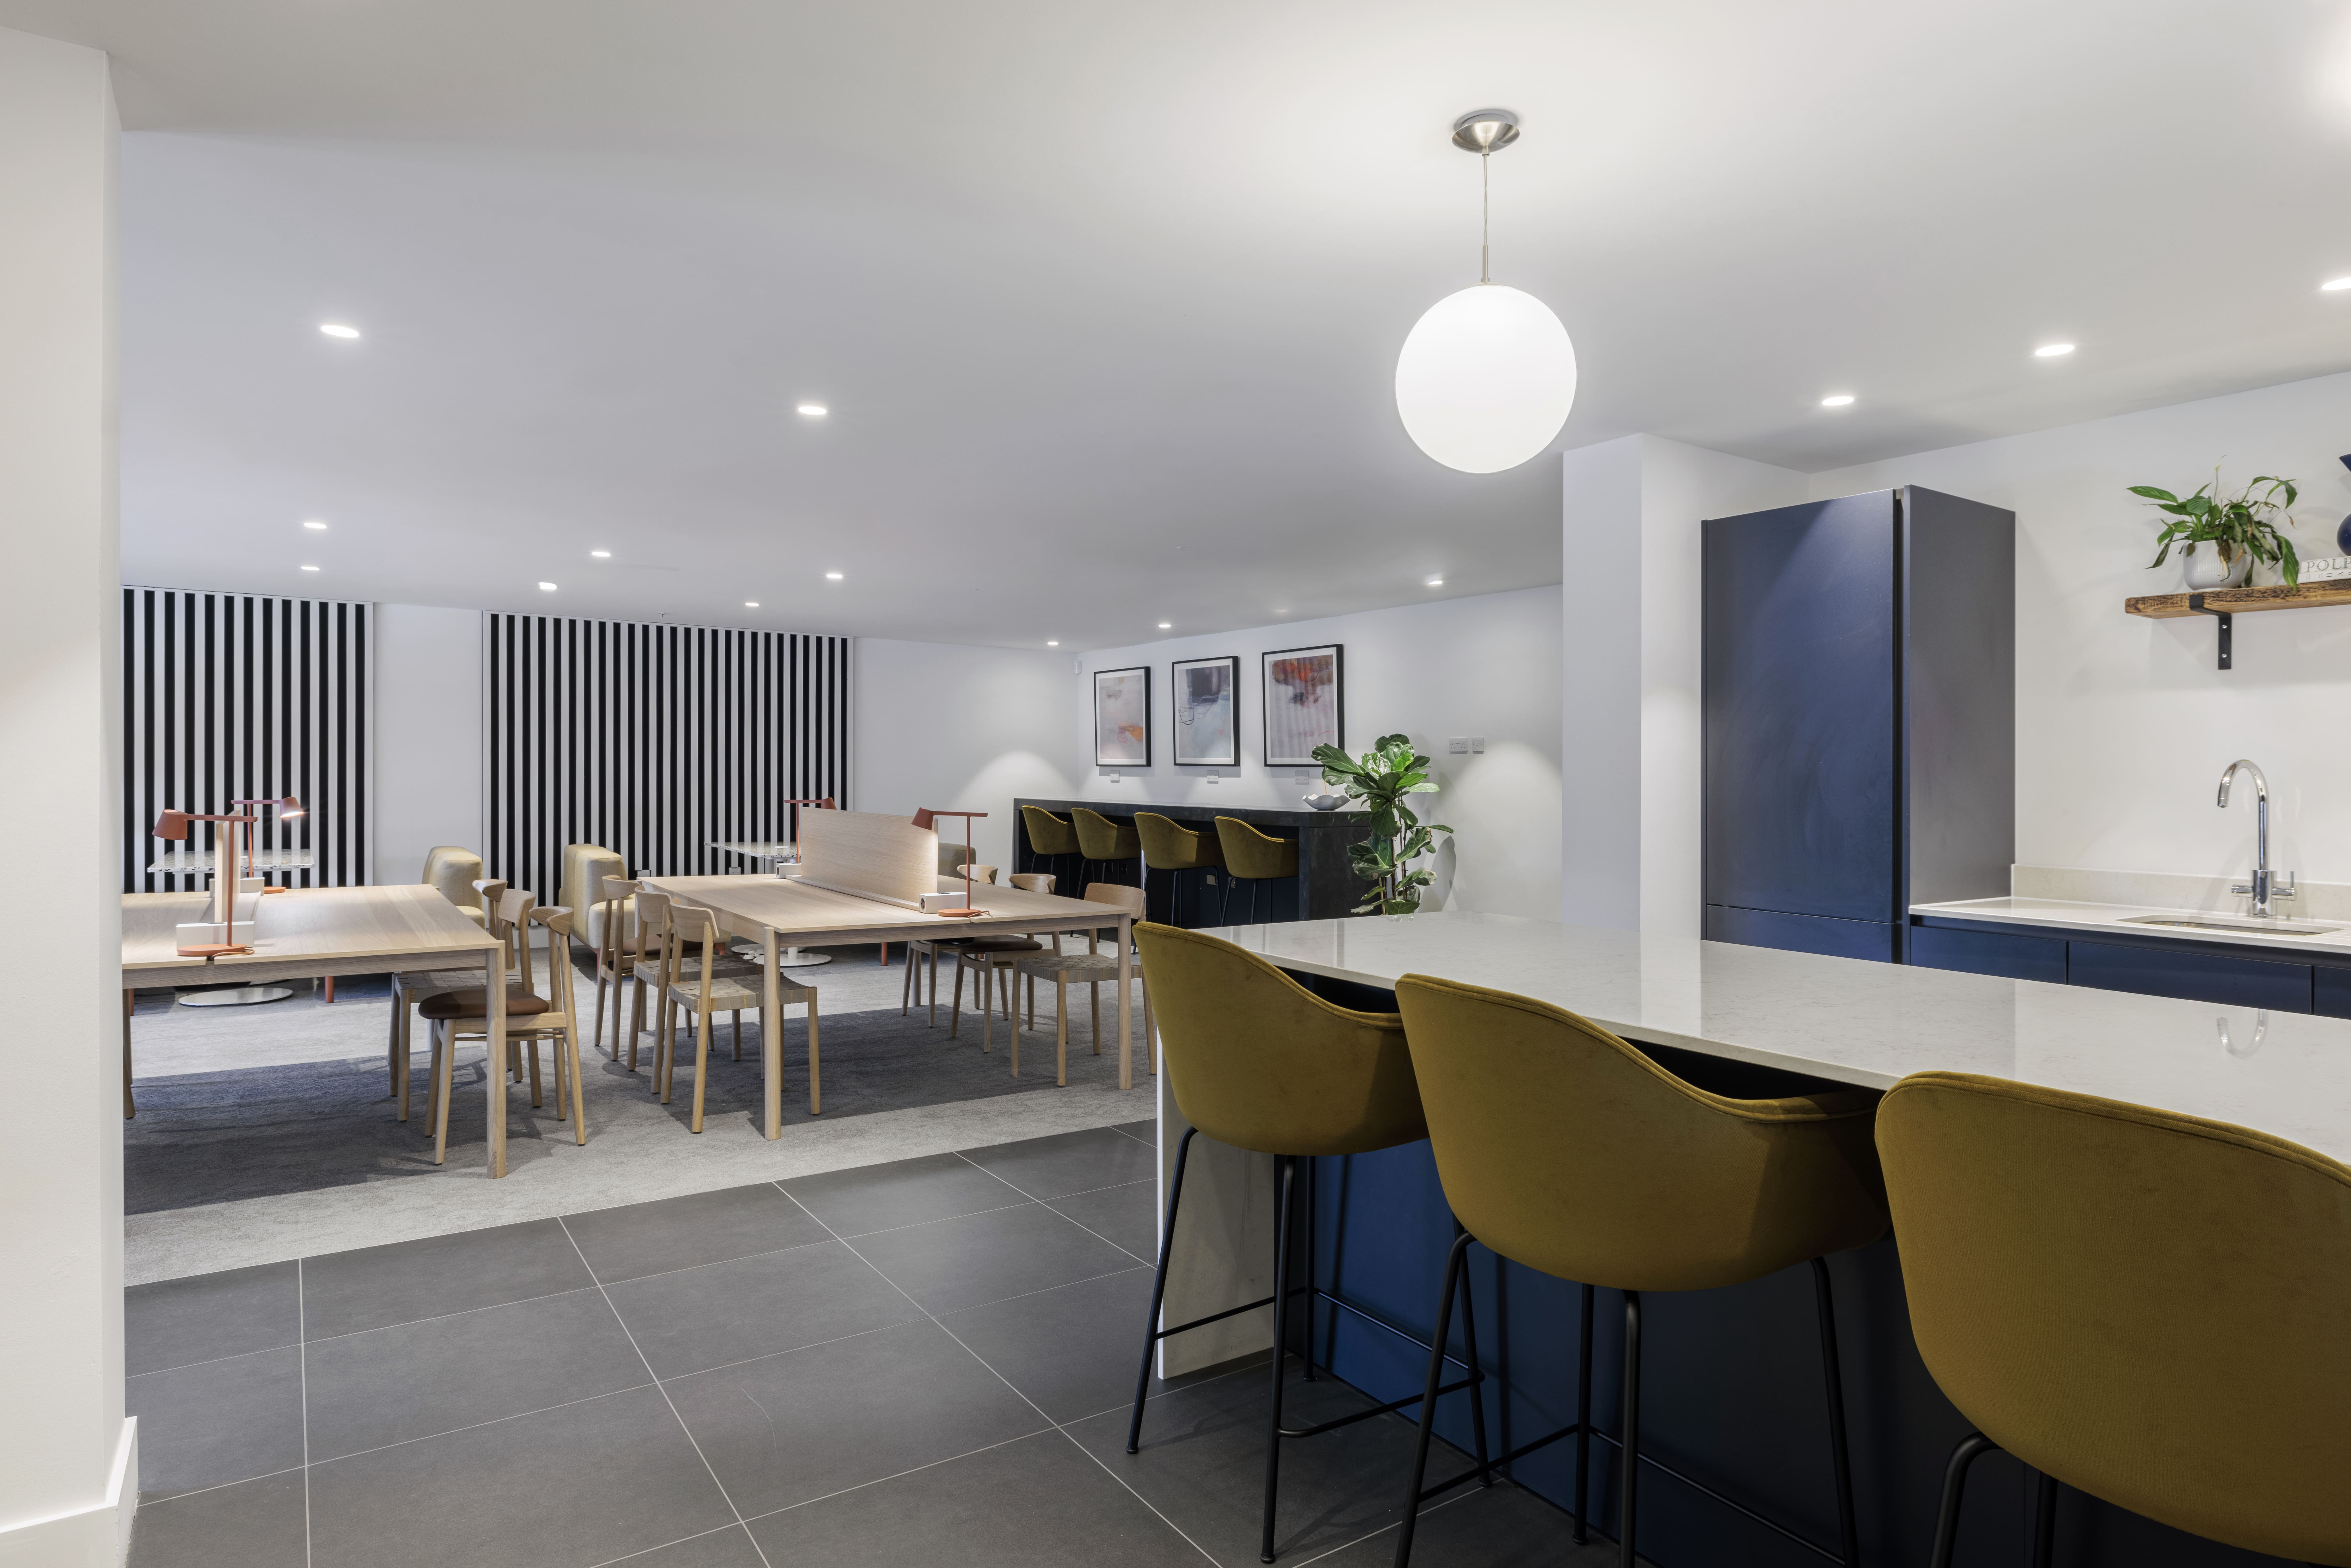 Apartments to Rent by Cortland in Cortland Cassiobury, Watford, WD18, coworking space